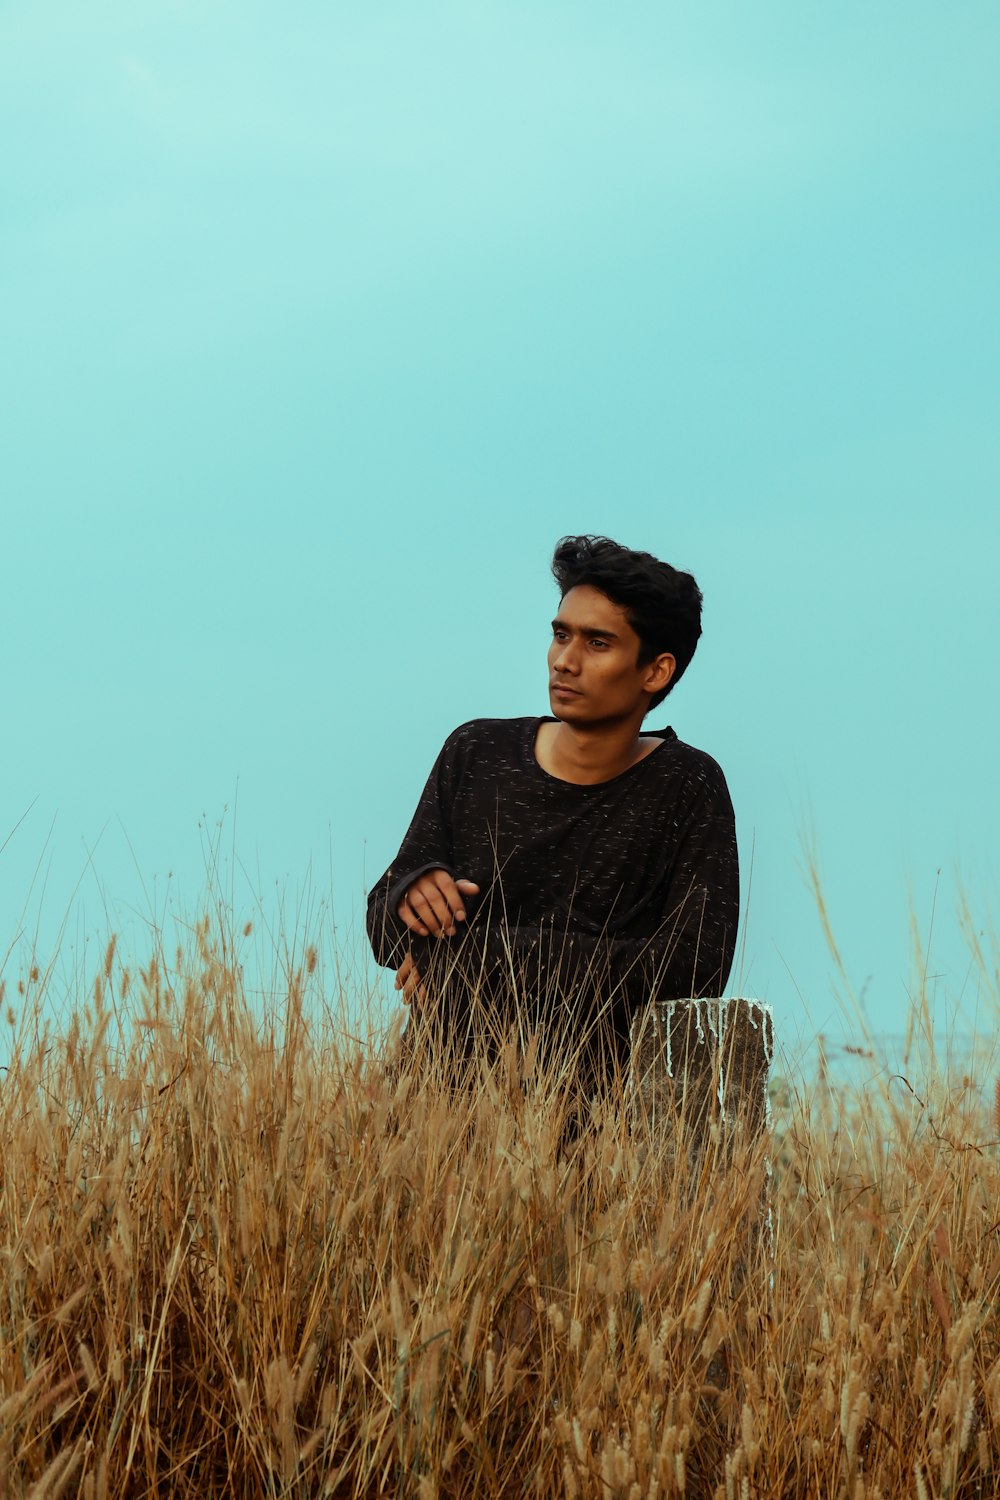 man in black sweater standing on brown grass field during daytime